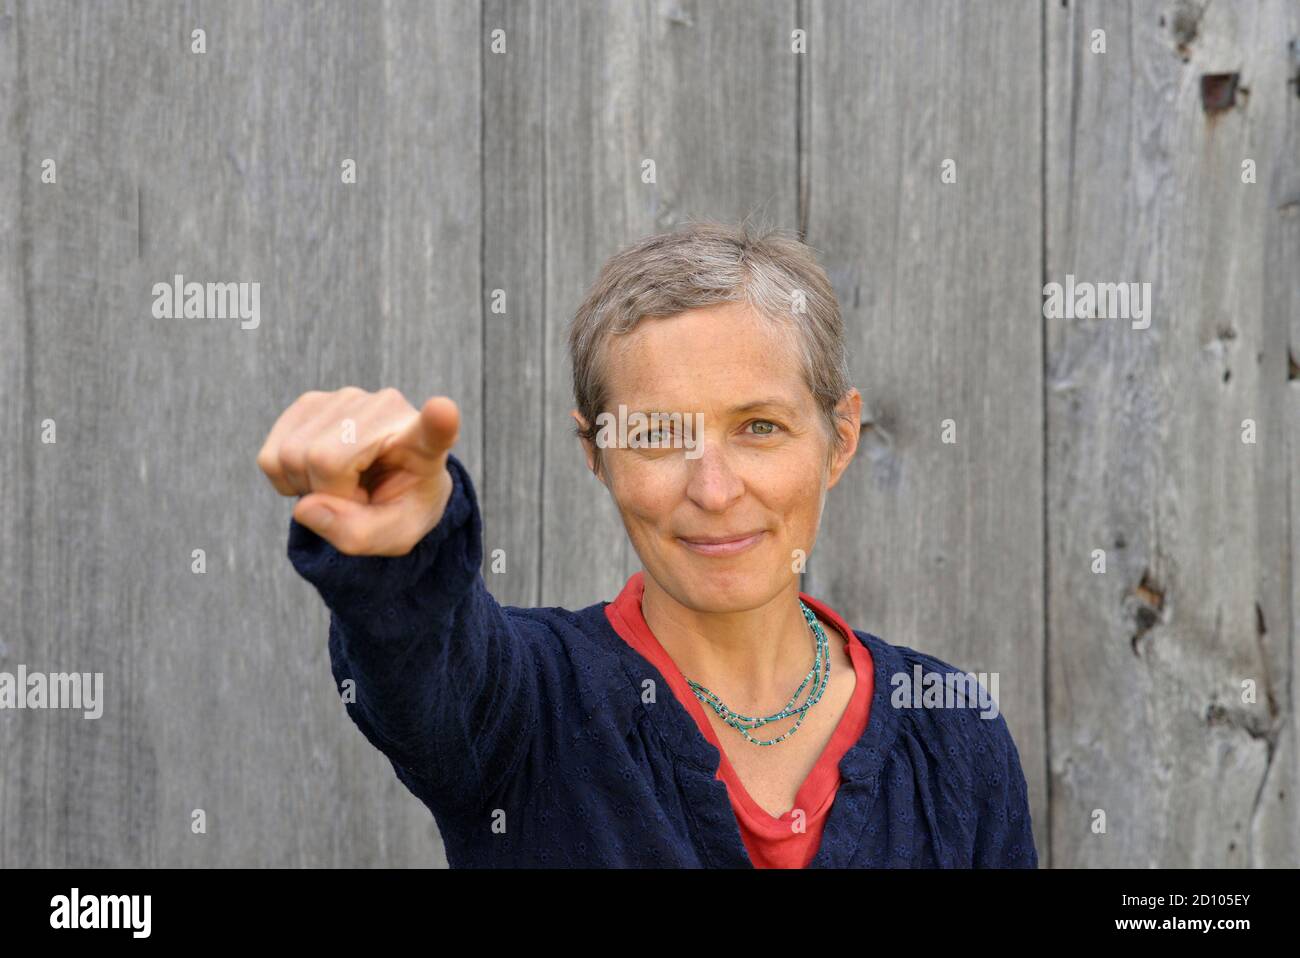 Positive middle-aged Caucasian country woman with short hair points at viewer with index finger of right hand, in front of old barn wood background. Stock Photo